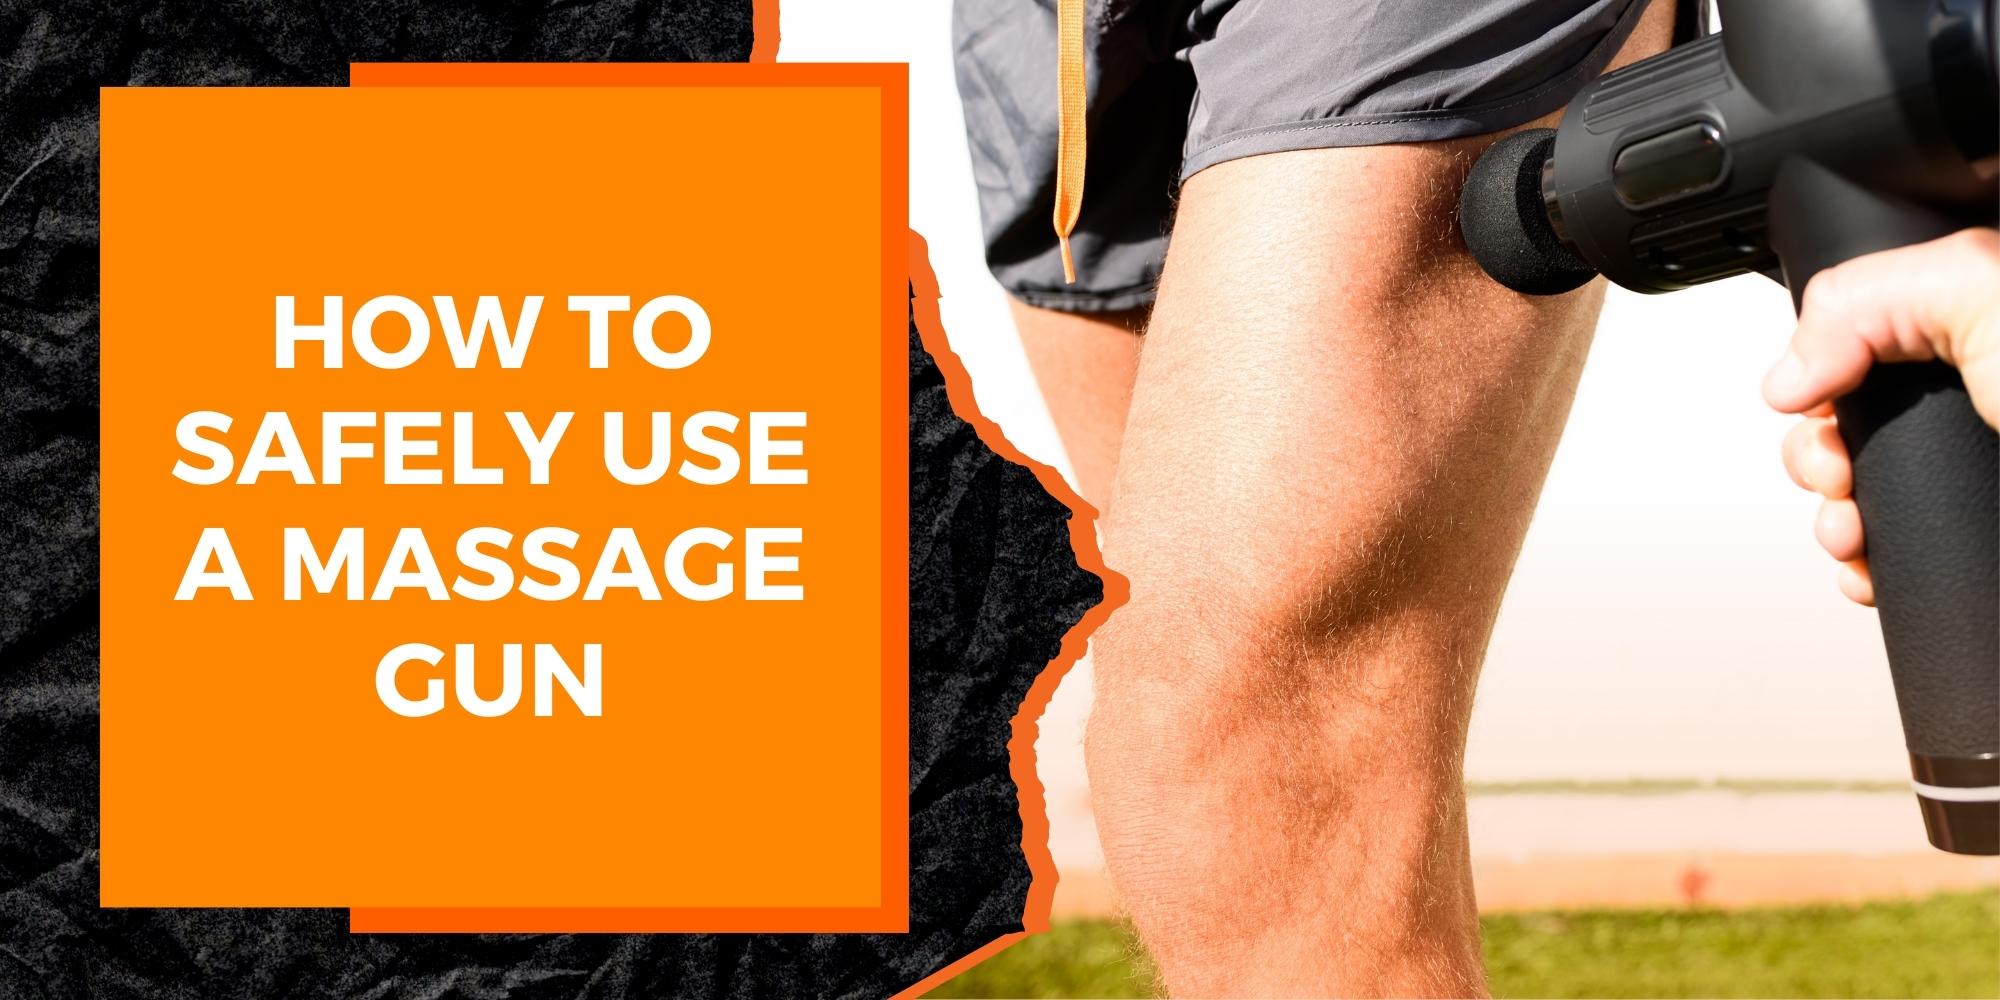 How to Safely Use a Massage Gun